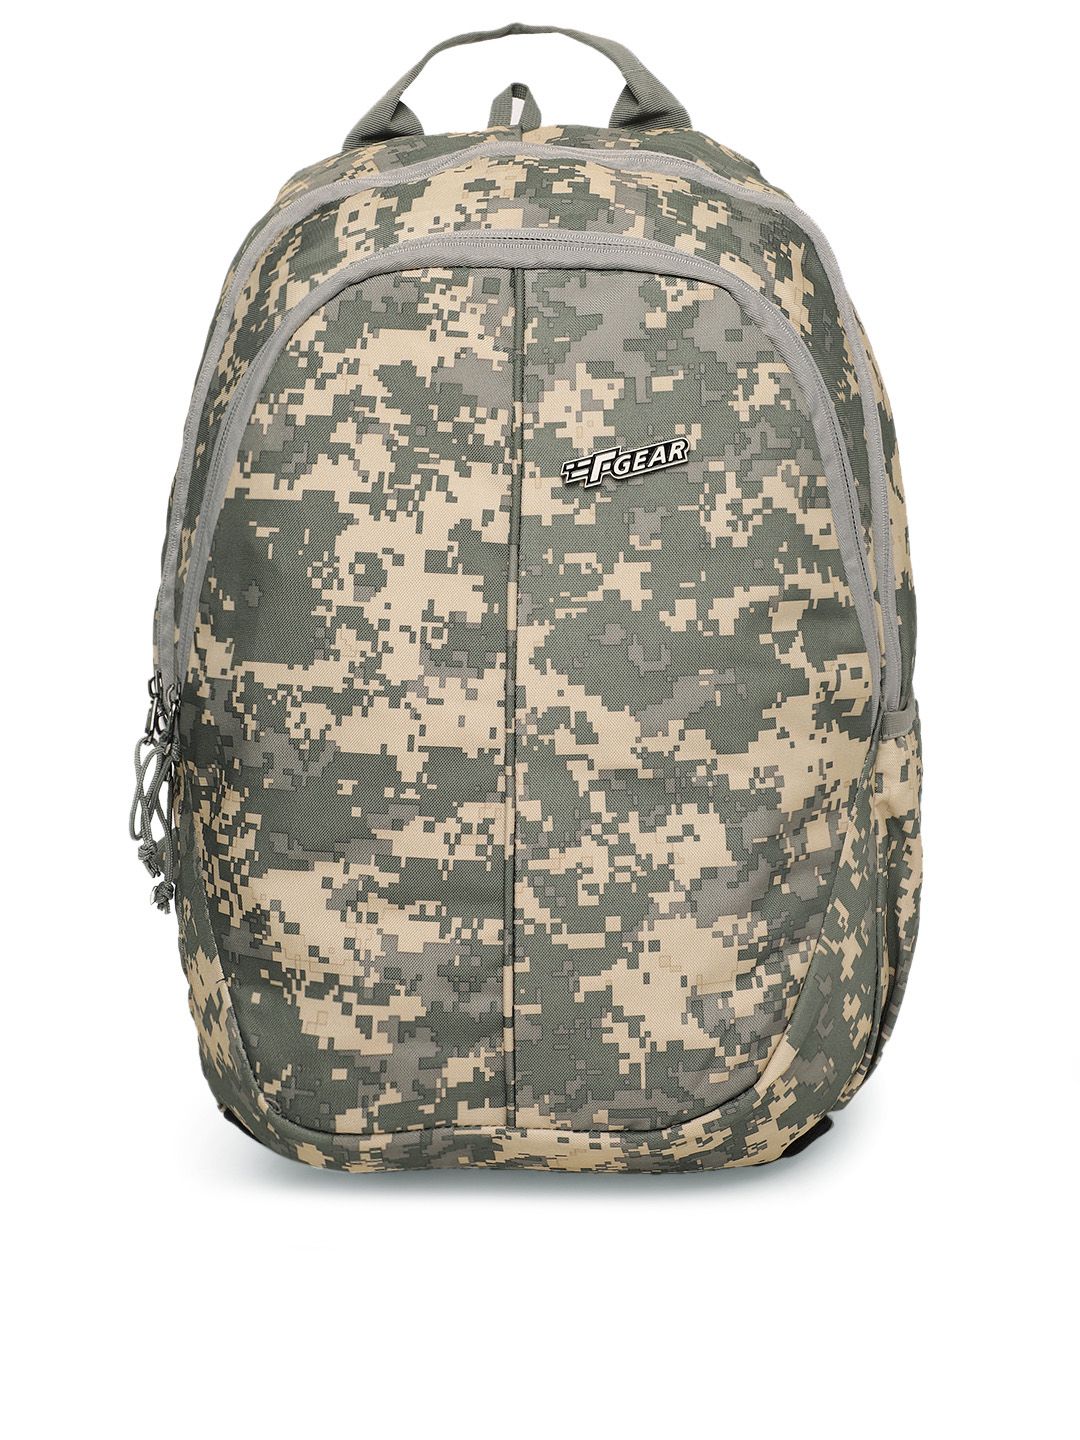 F Gear Unisex Green Graphic Military Paladin Marpat ACV Digital Camo Backpack Price in India